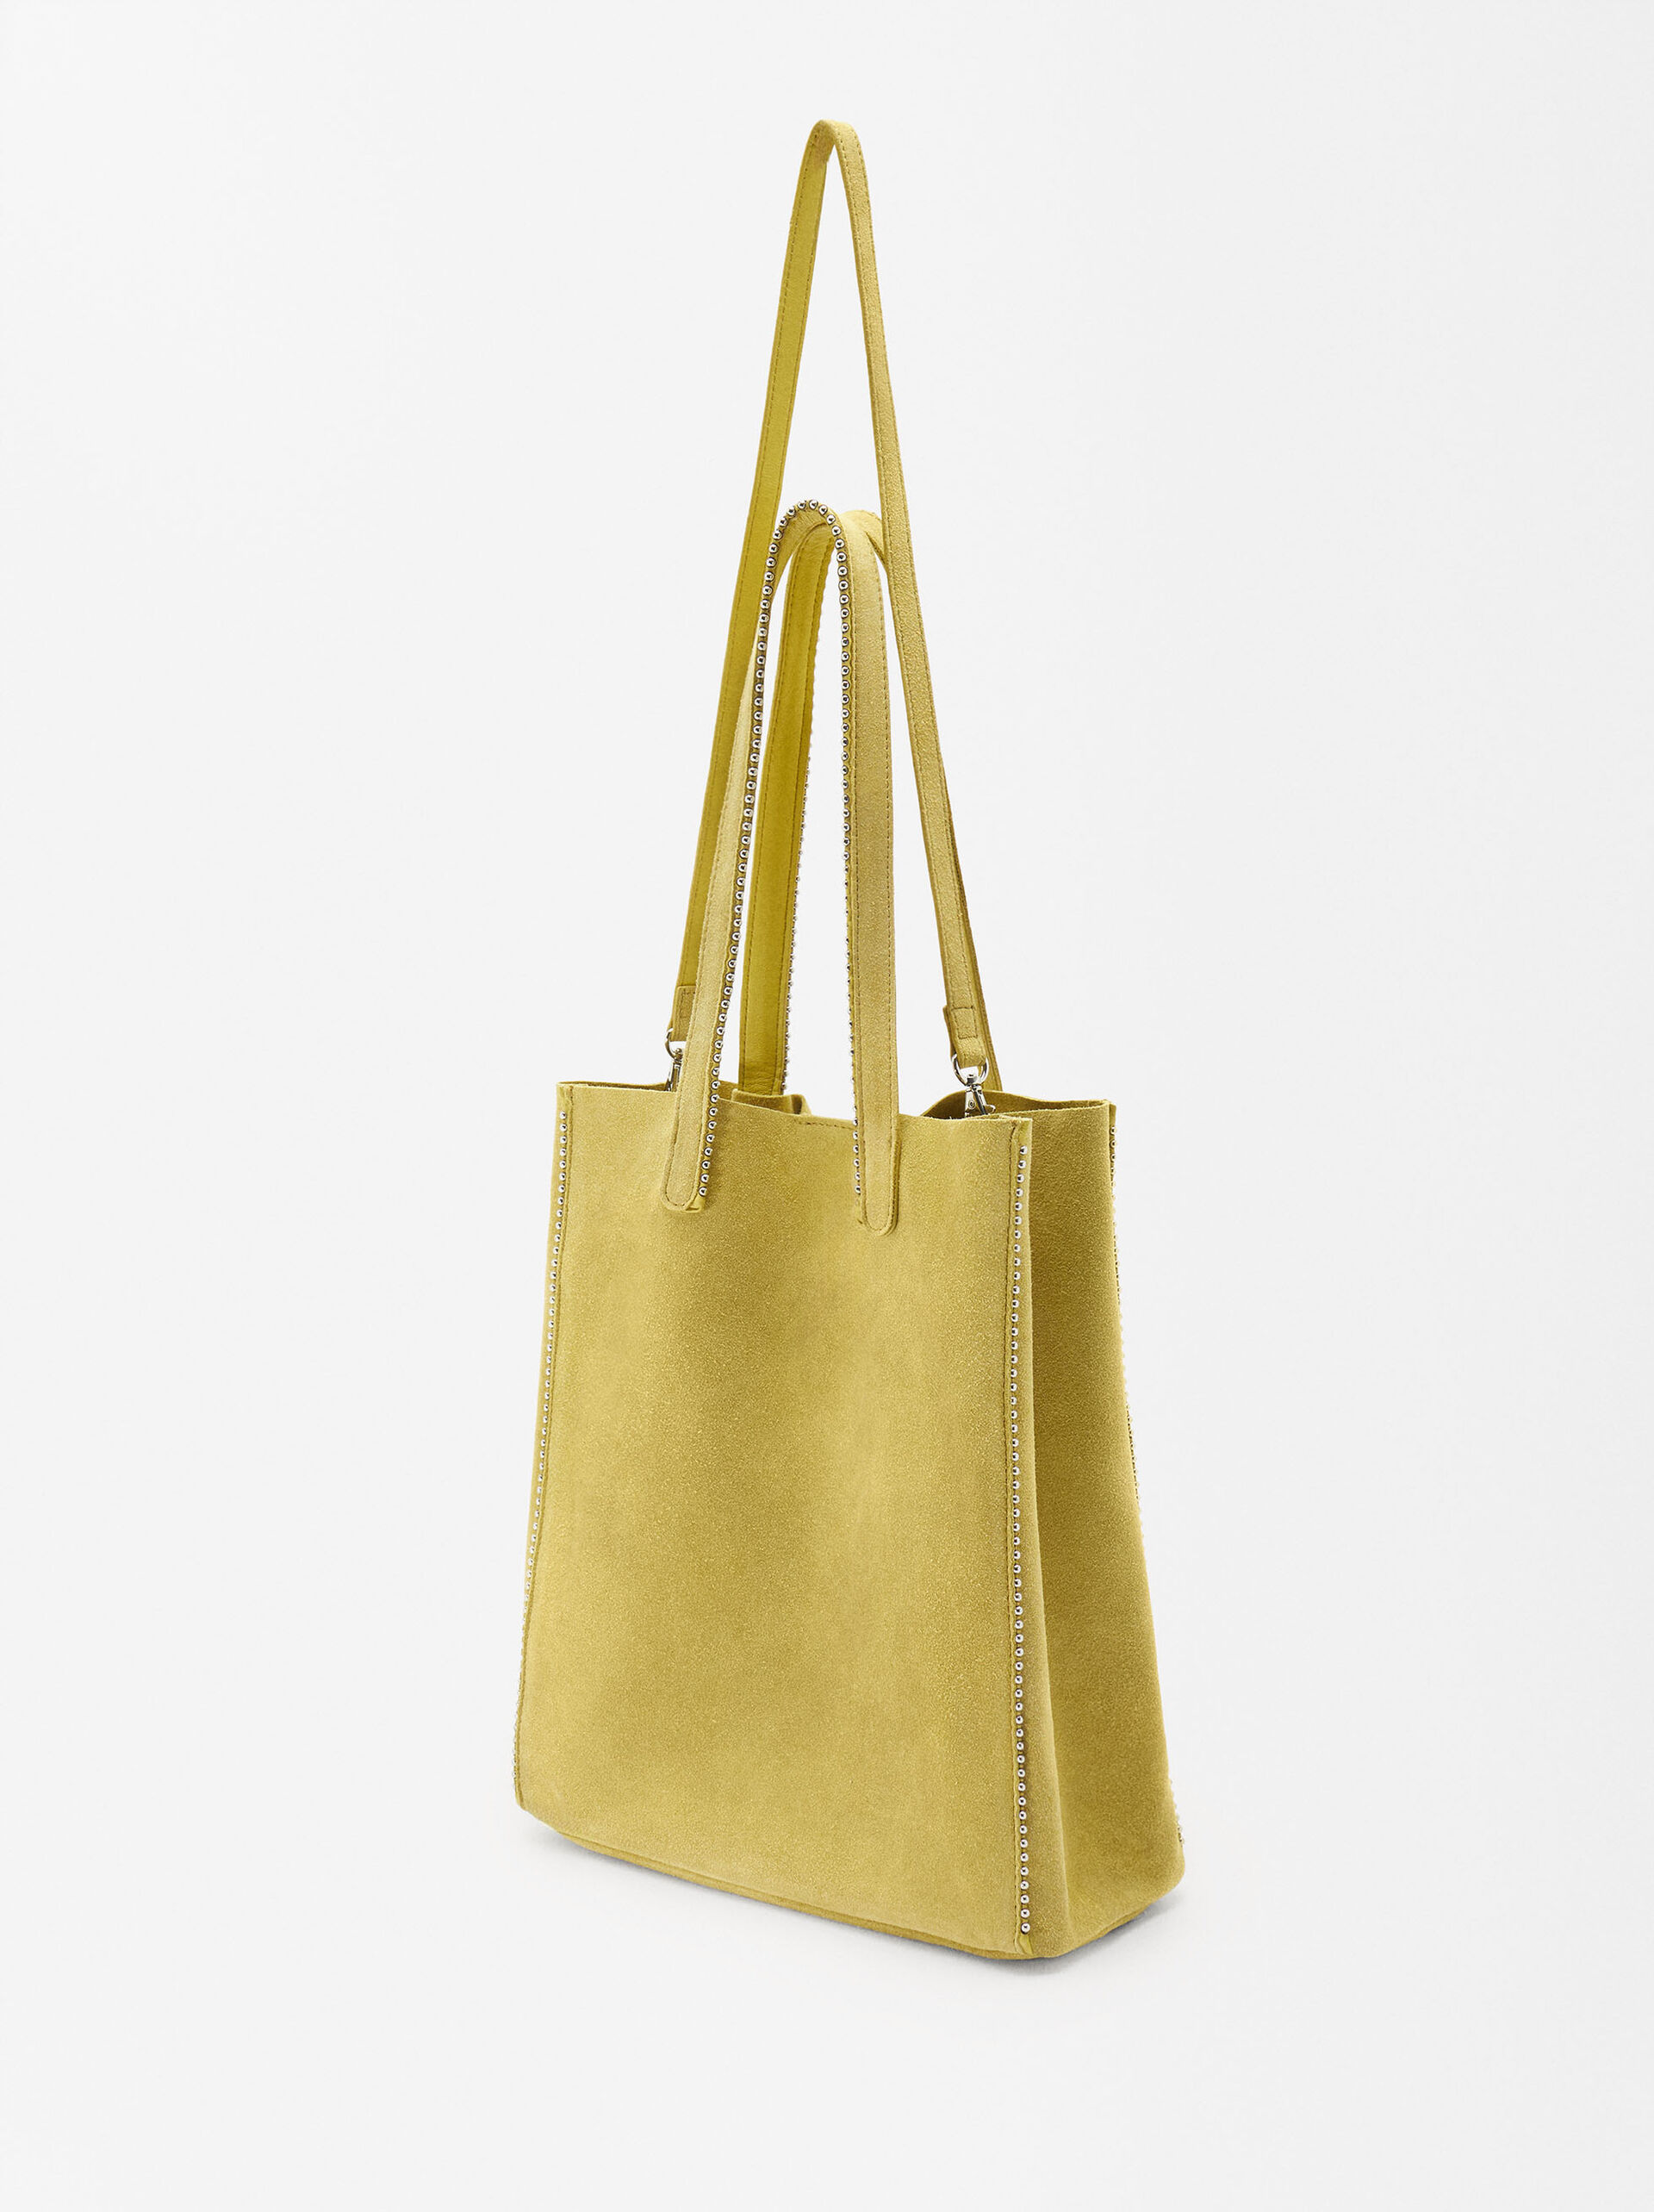 Leather Tote Bag With Pendant - Limited Edition image number 3.0